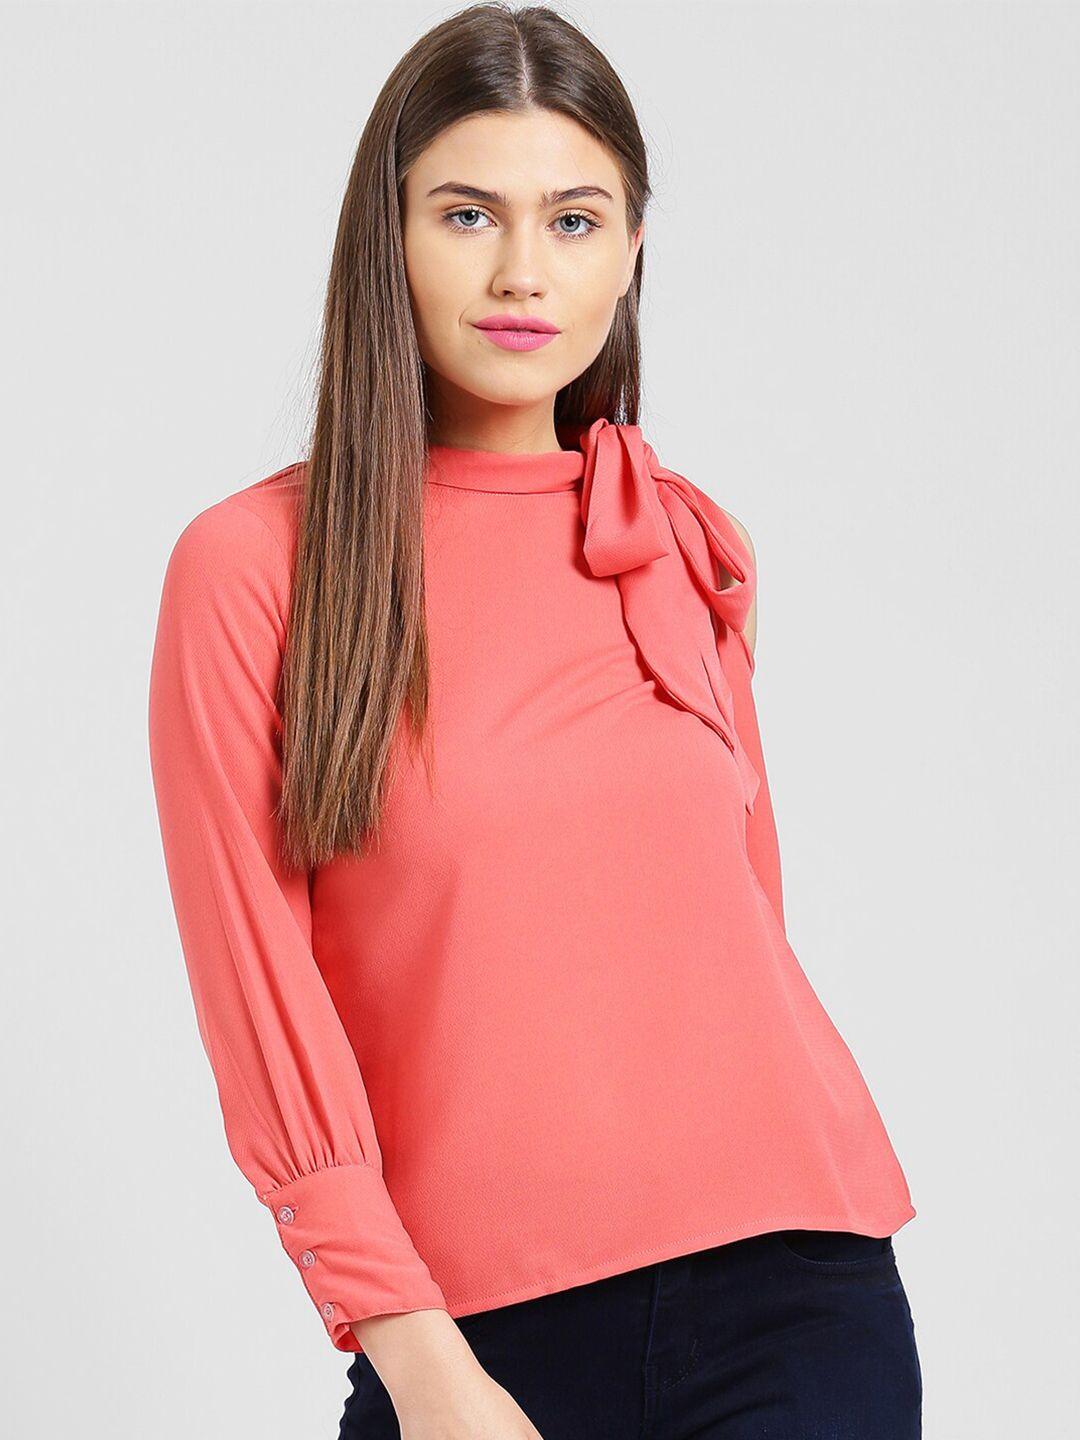 be indi women pink tie-up neck top